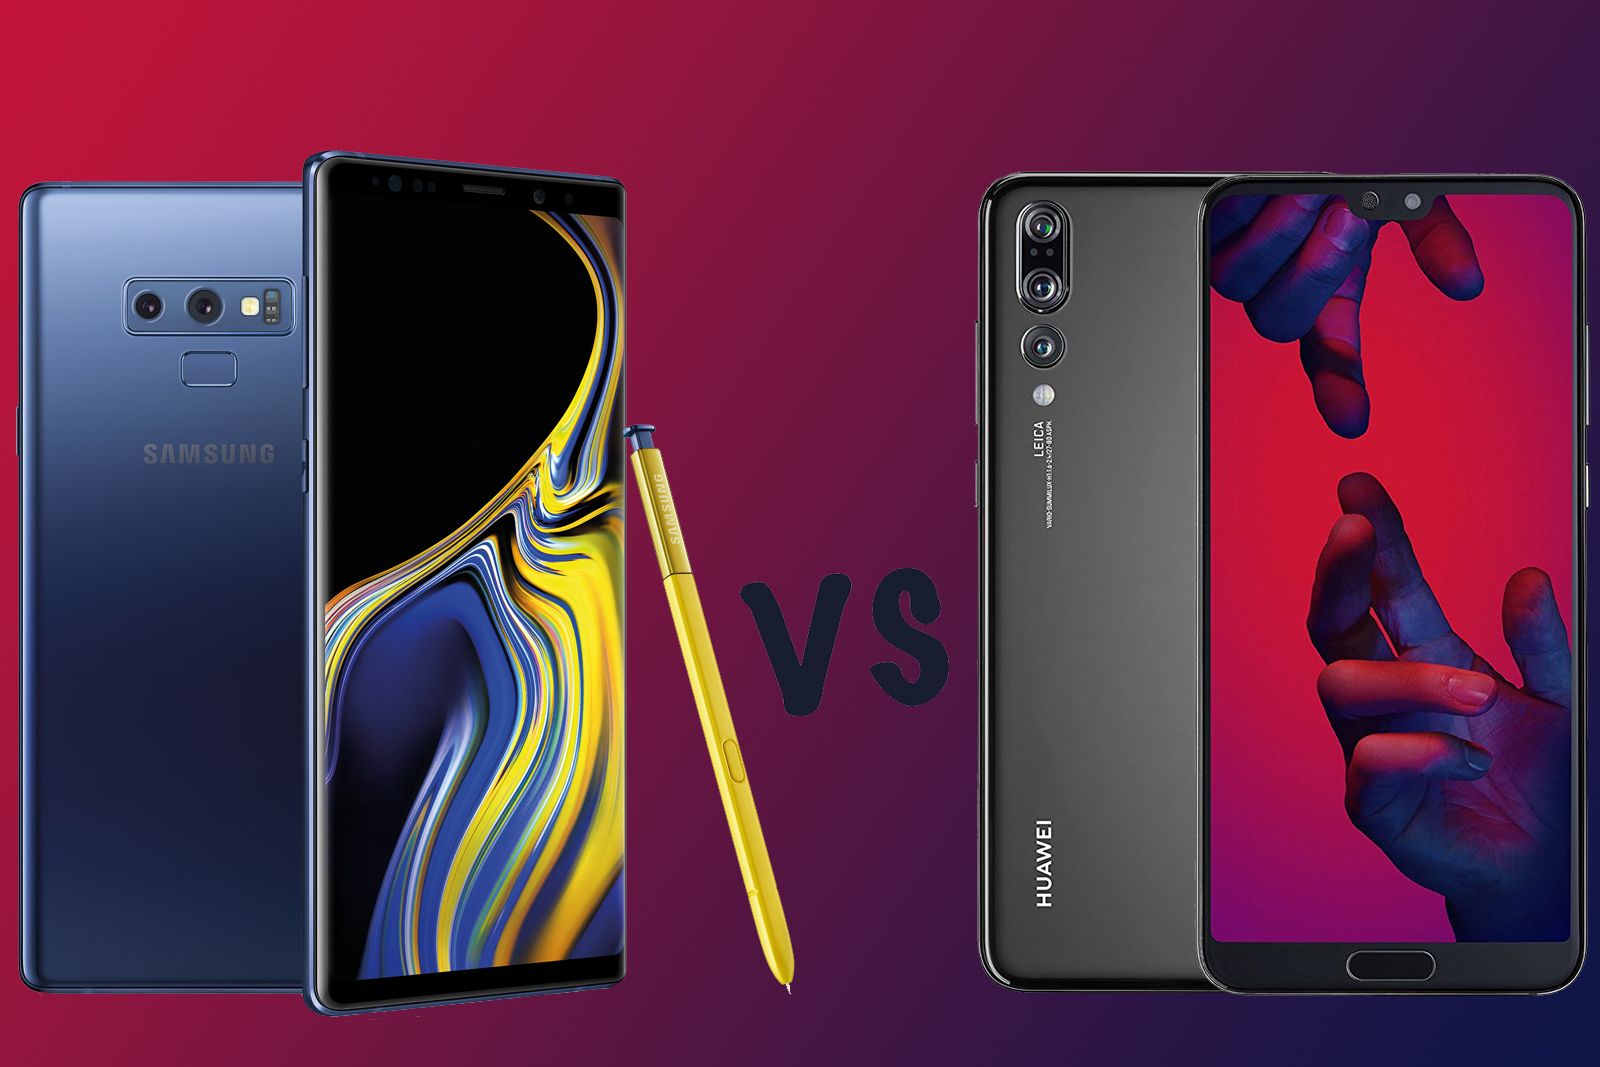 Samsung Galaxy Note 9 vs Huawei P20 Pro Whats the difference image 1